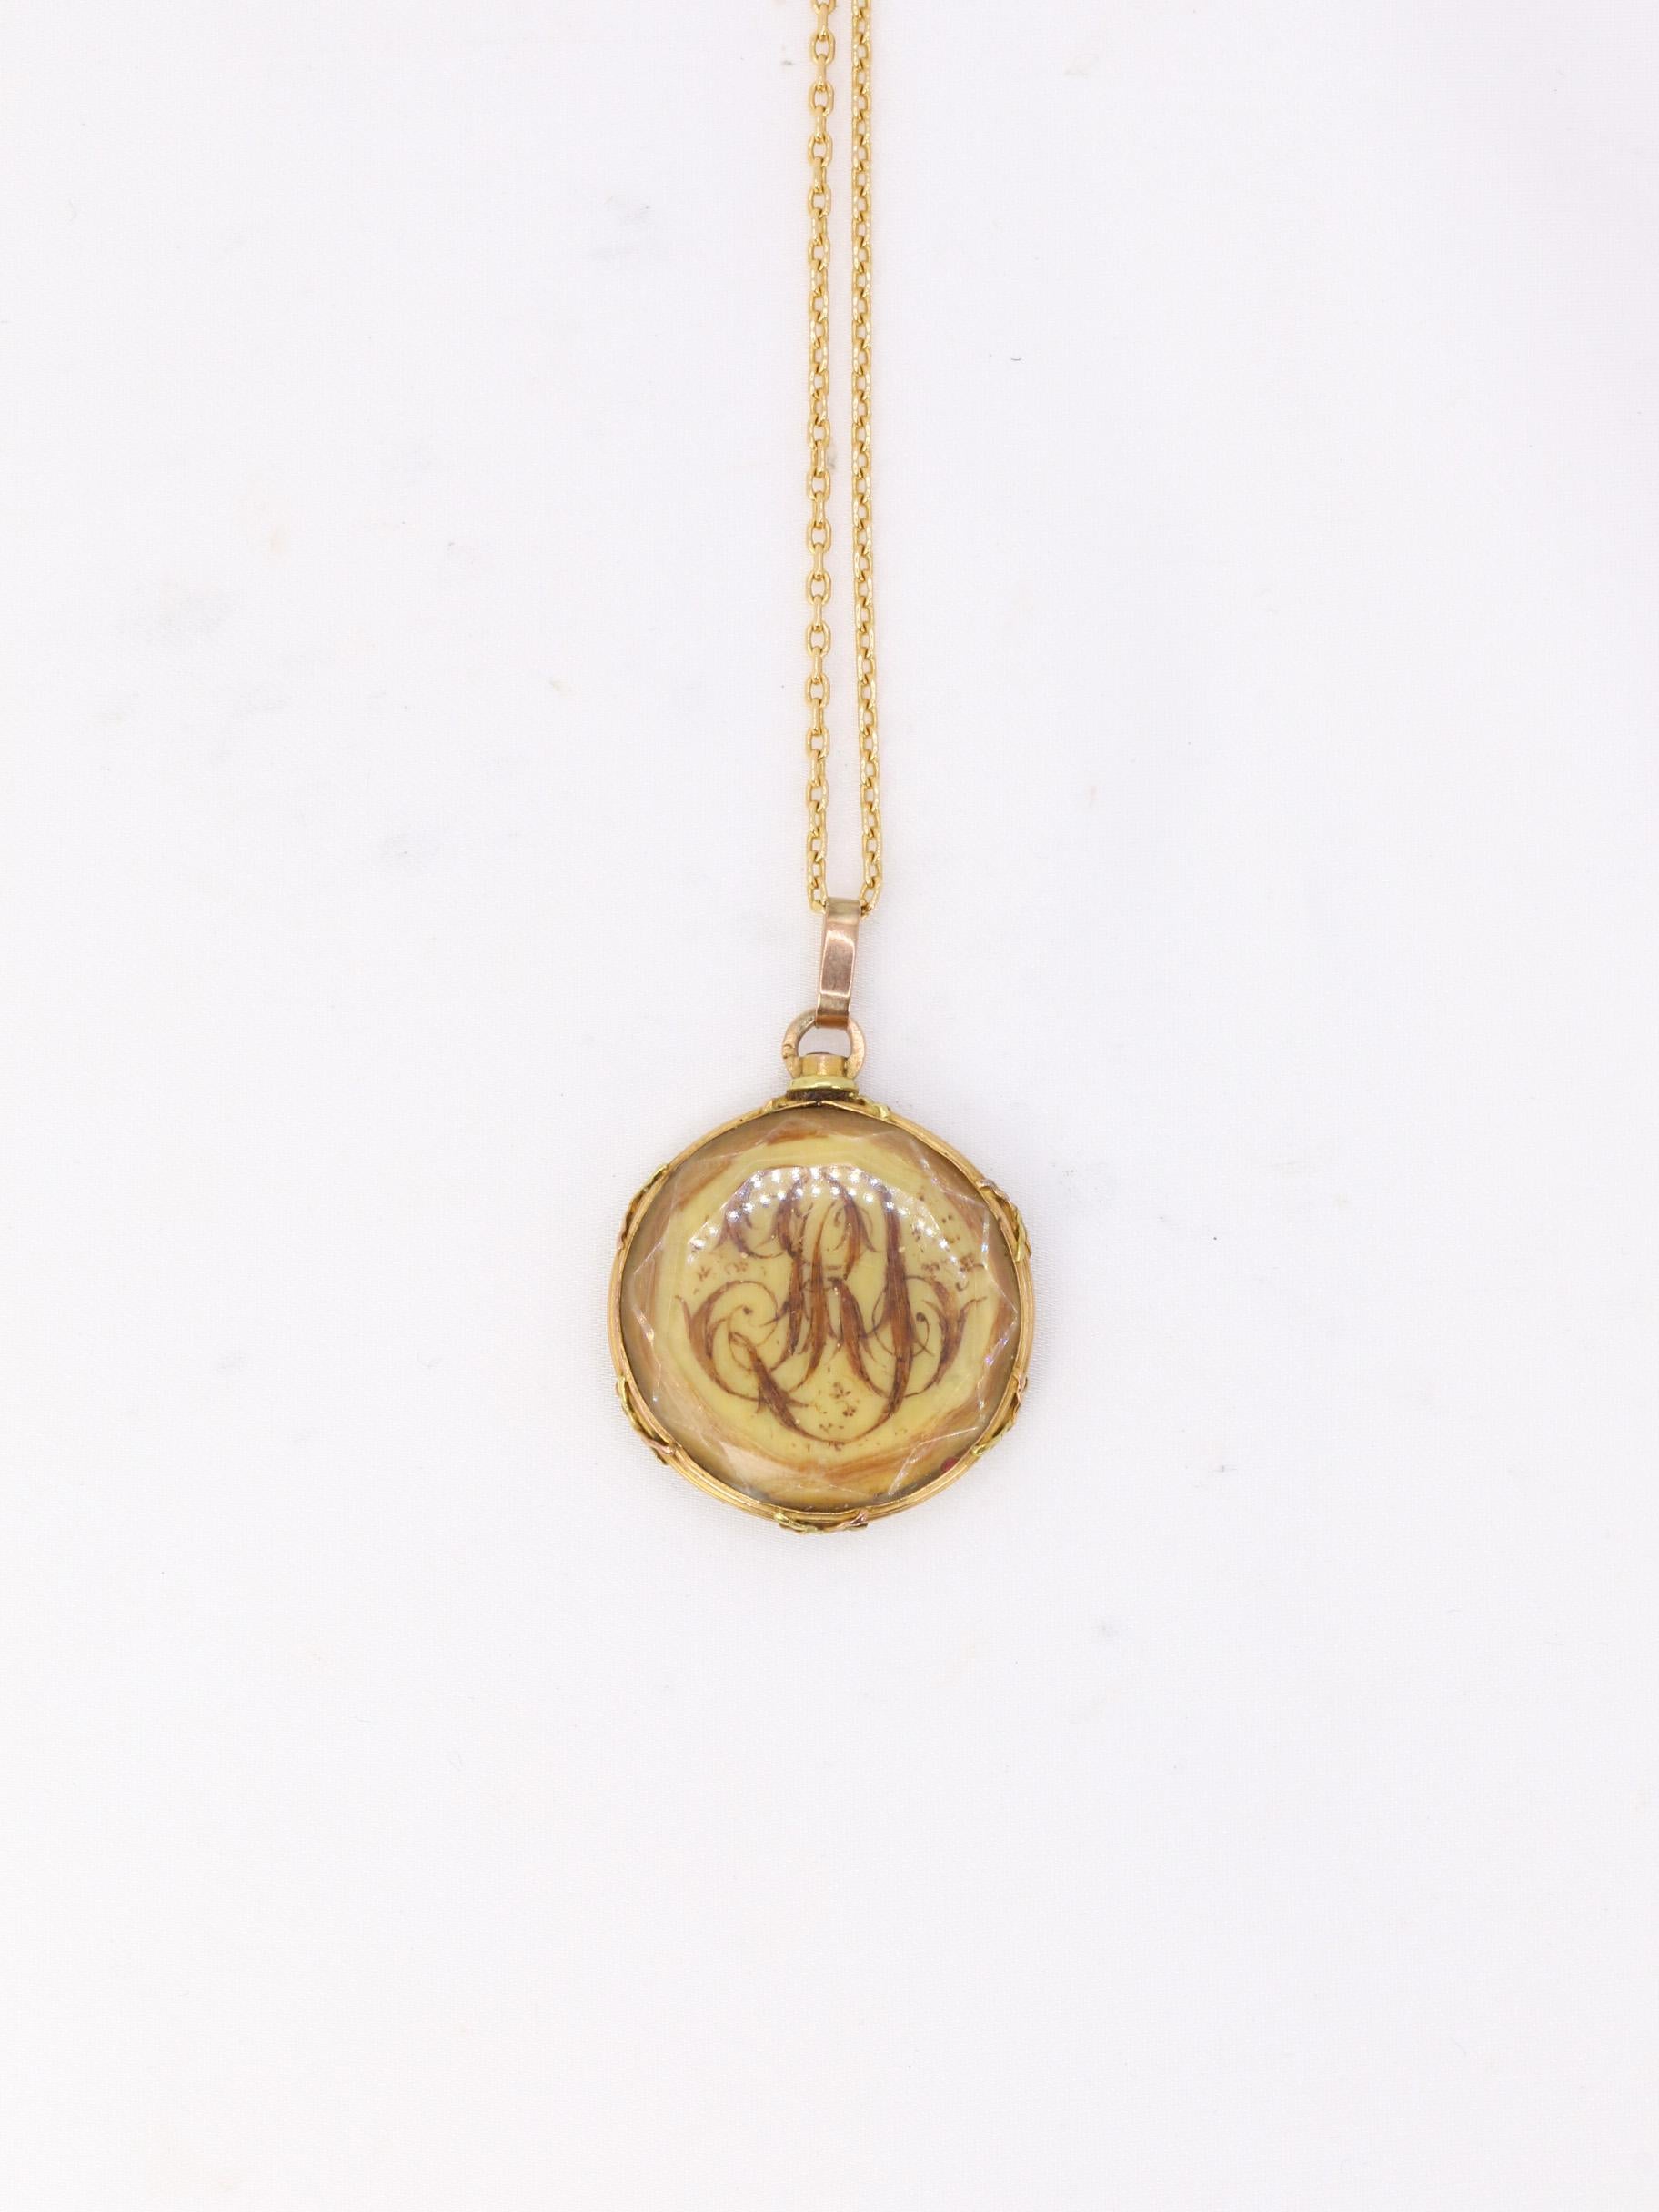 Round 18k (750°/°°) yellow gold pendant featuring a 4-leaf clover motif in hair on one side and a monogram in hair with the letters R and G on the other.
This type of sentimental or mourning jewelry was fashionable from the 1820s until the Second